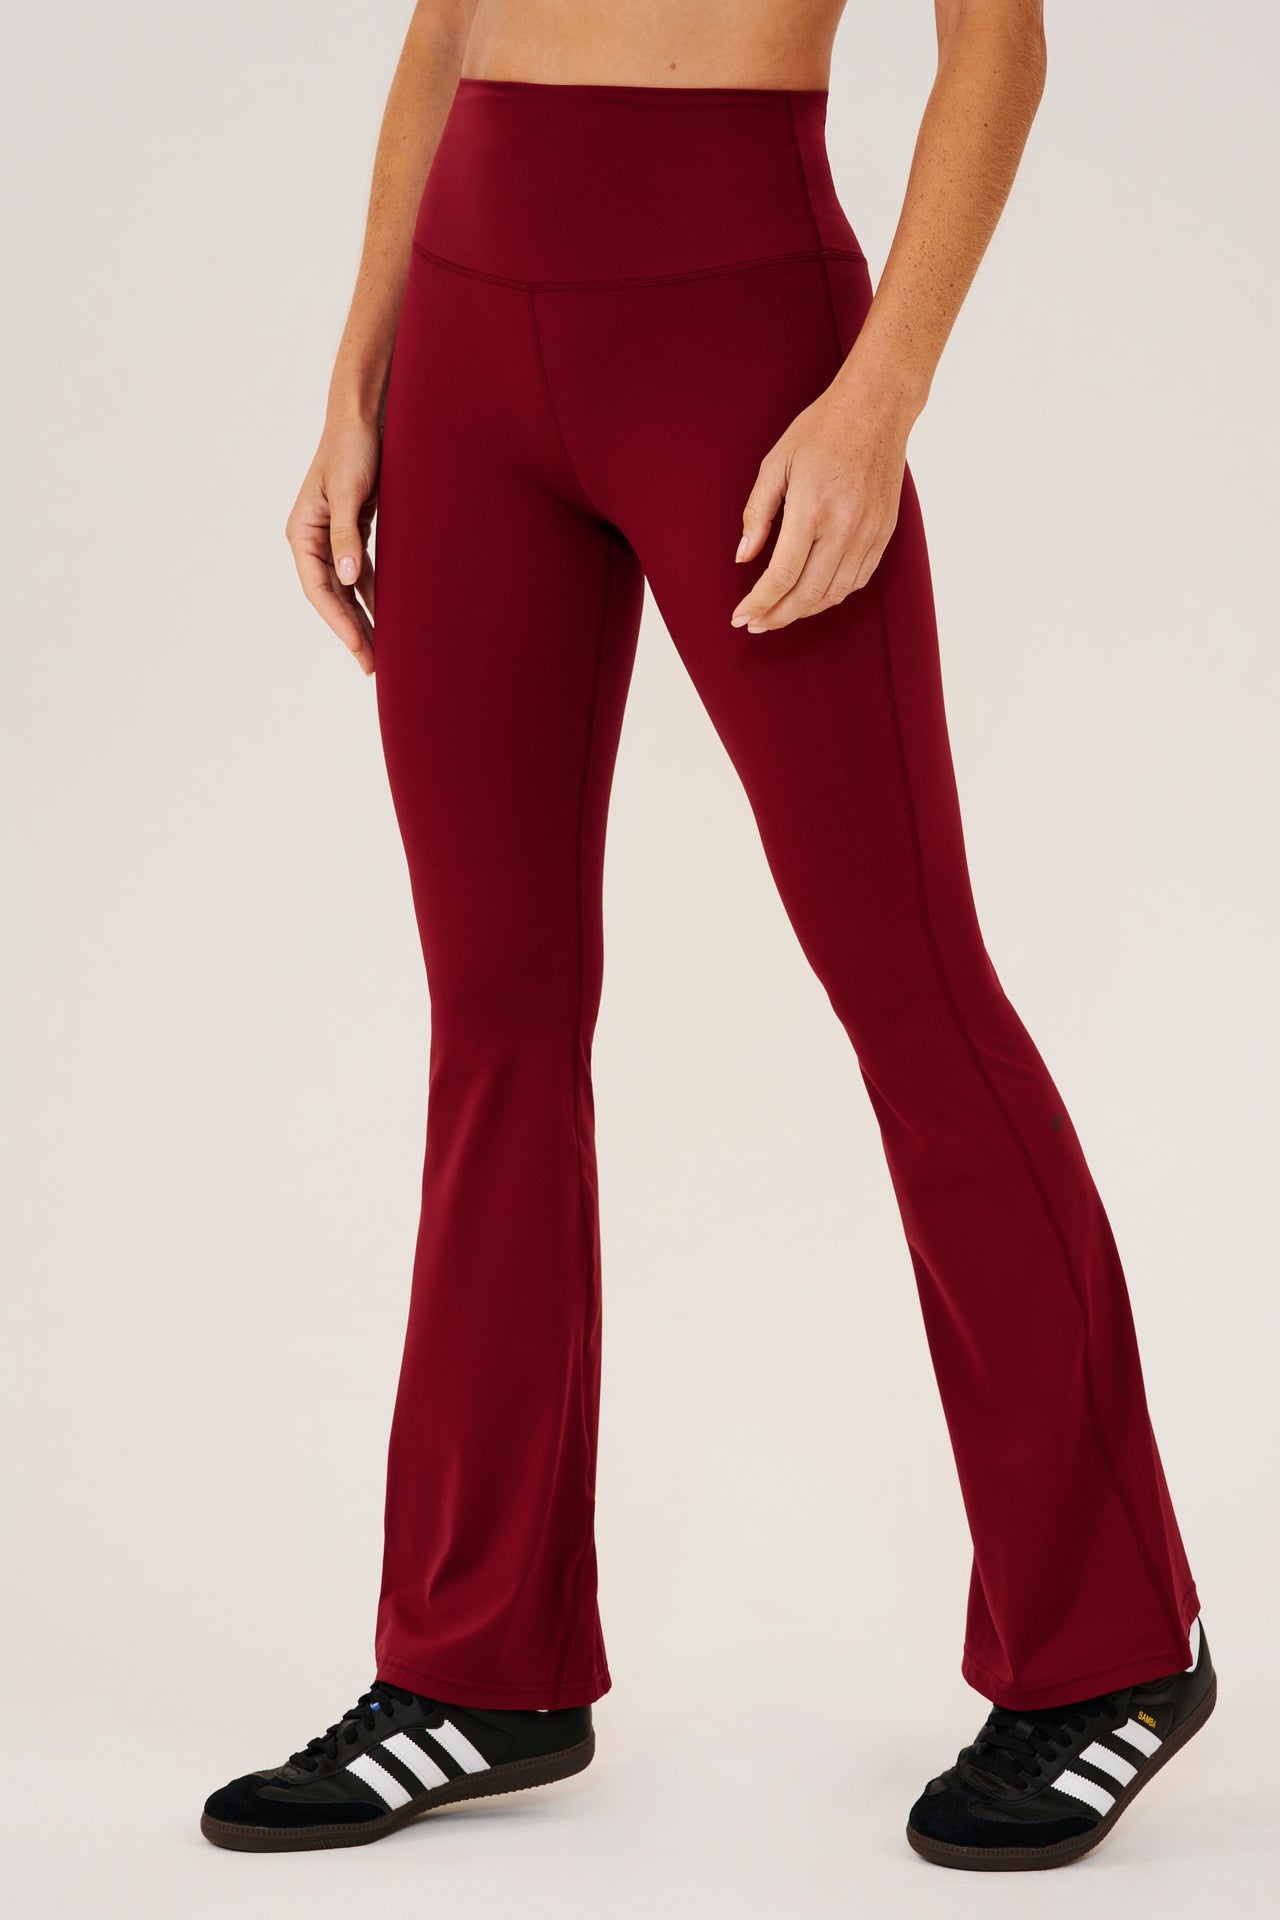 Frontview of dark red high waist below ankle length legging with wide flared bottoms. Paired with black shoes with white stripes.